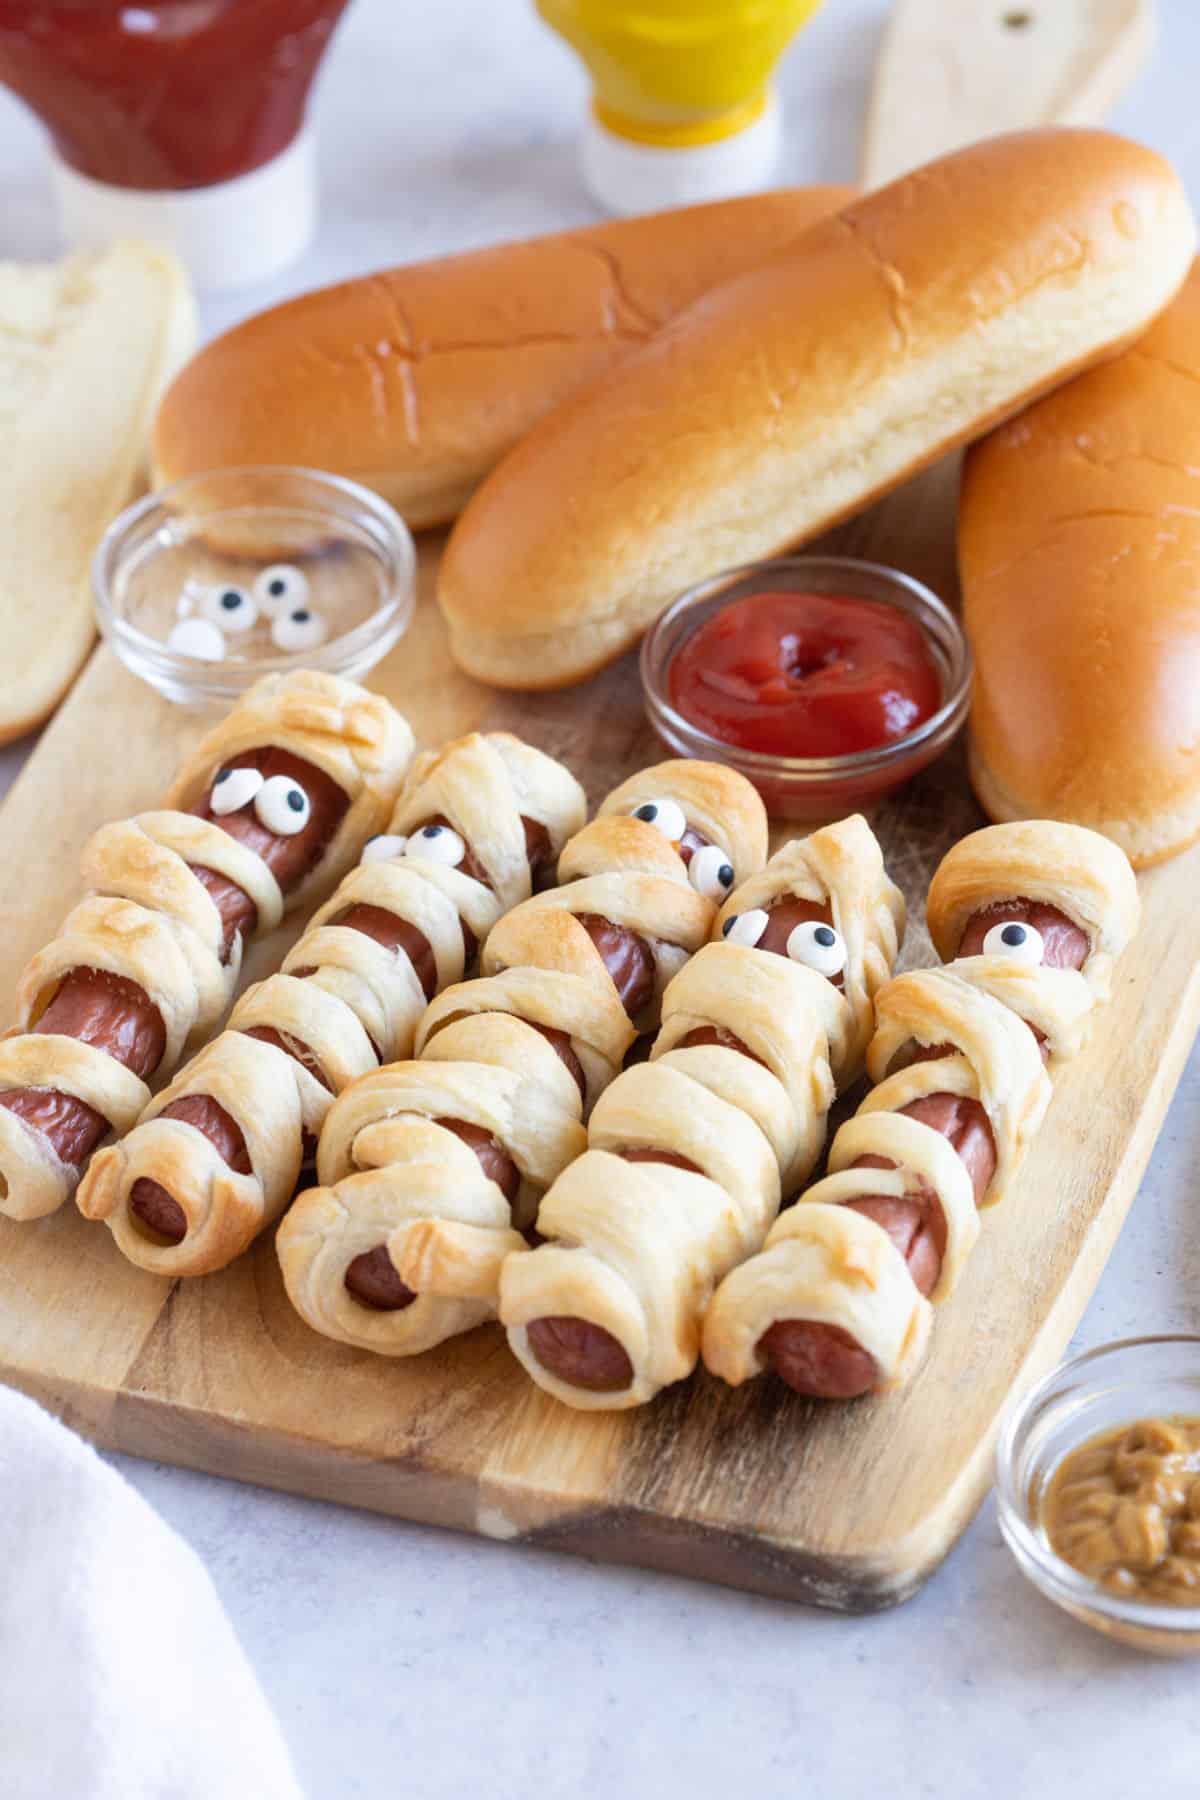 Mummy dogs with tomato ketchup.